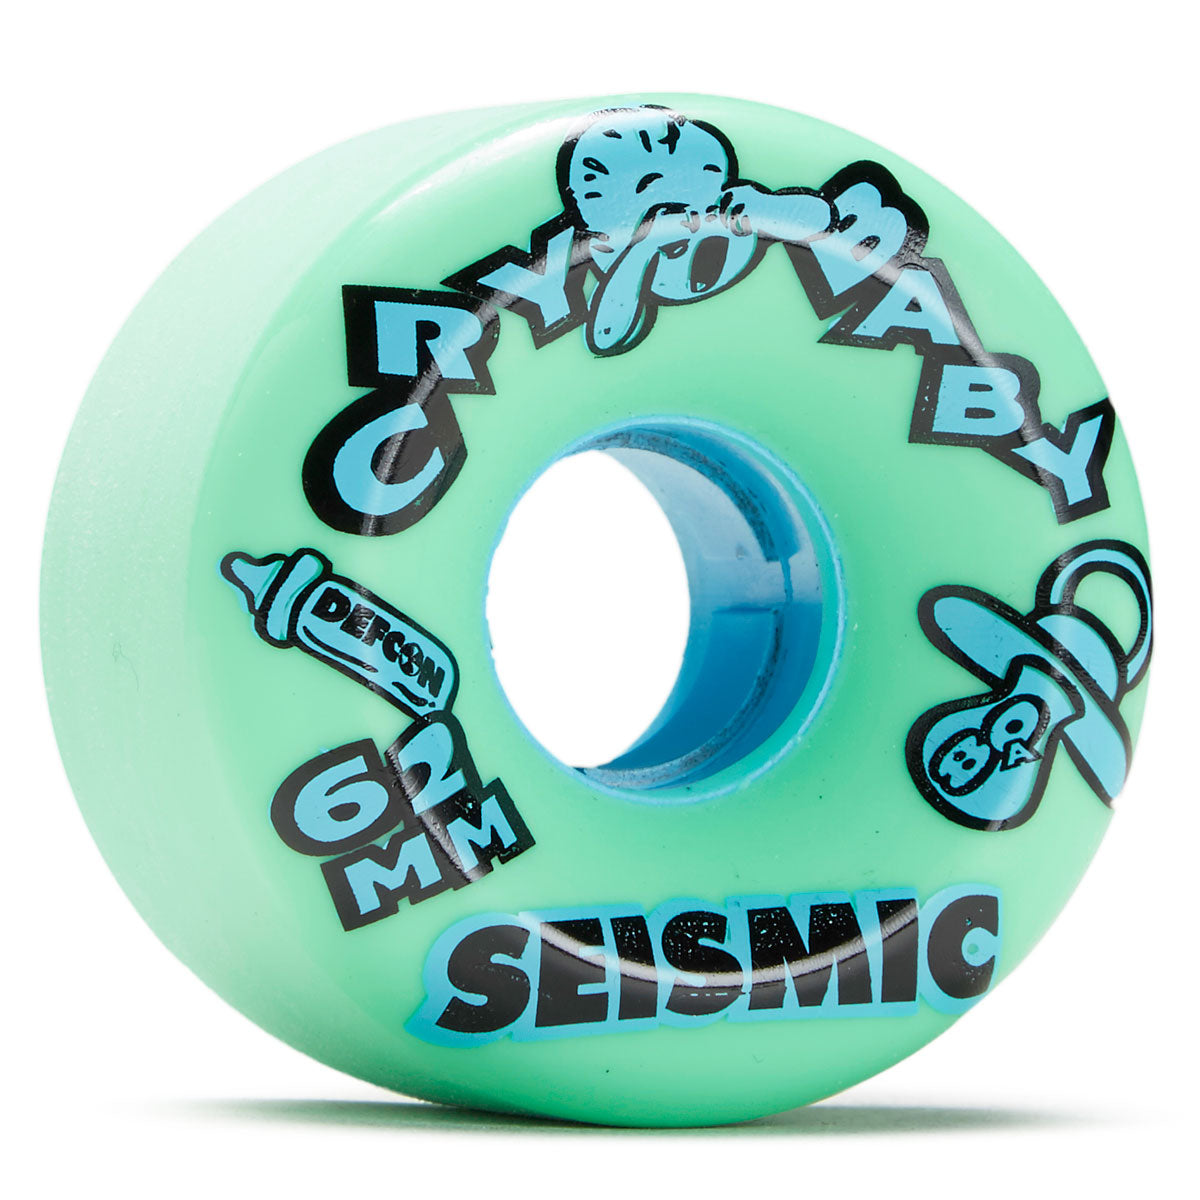 Seismic Crybaby 80a Longboard Wheels - Mint - 62mm image 1